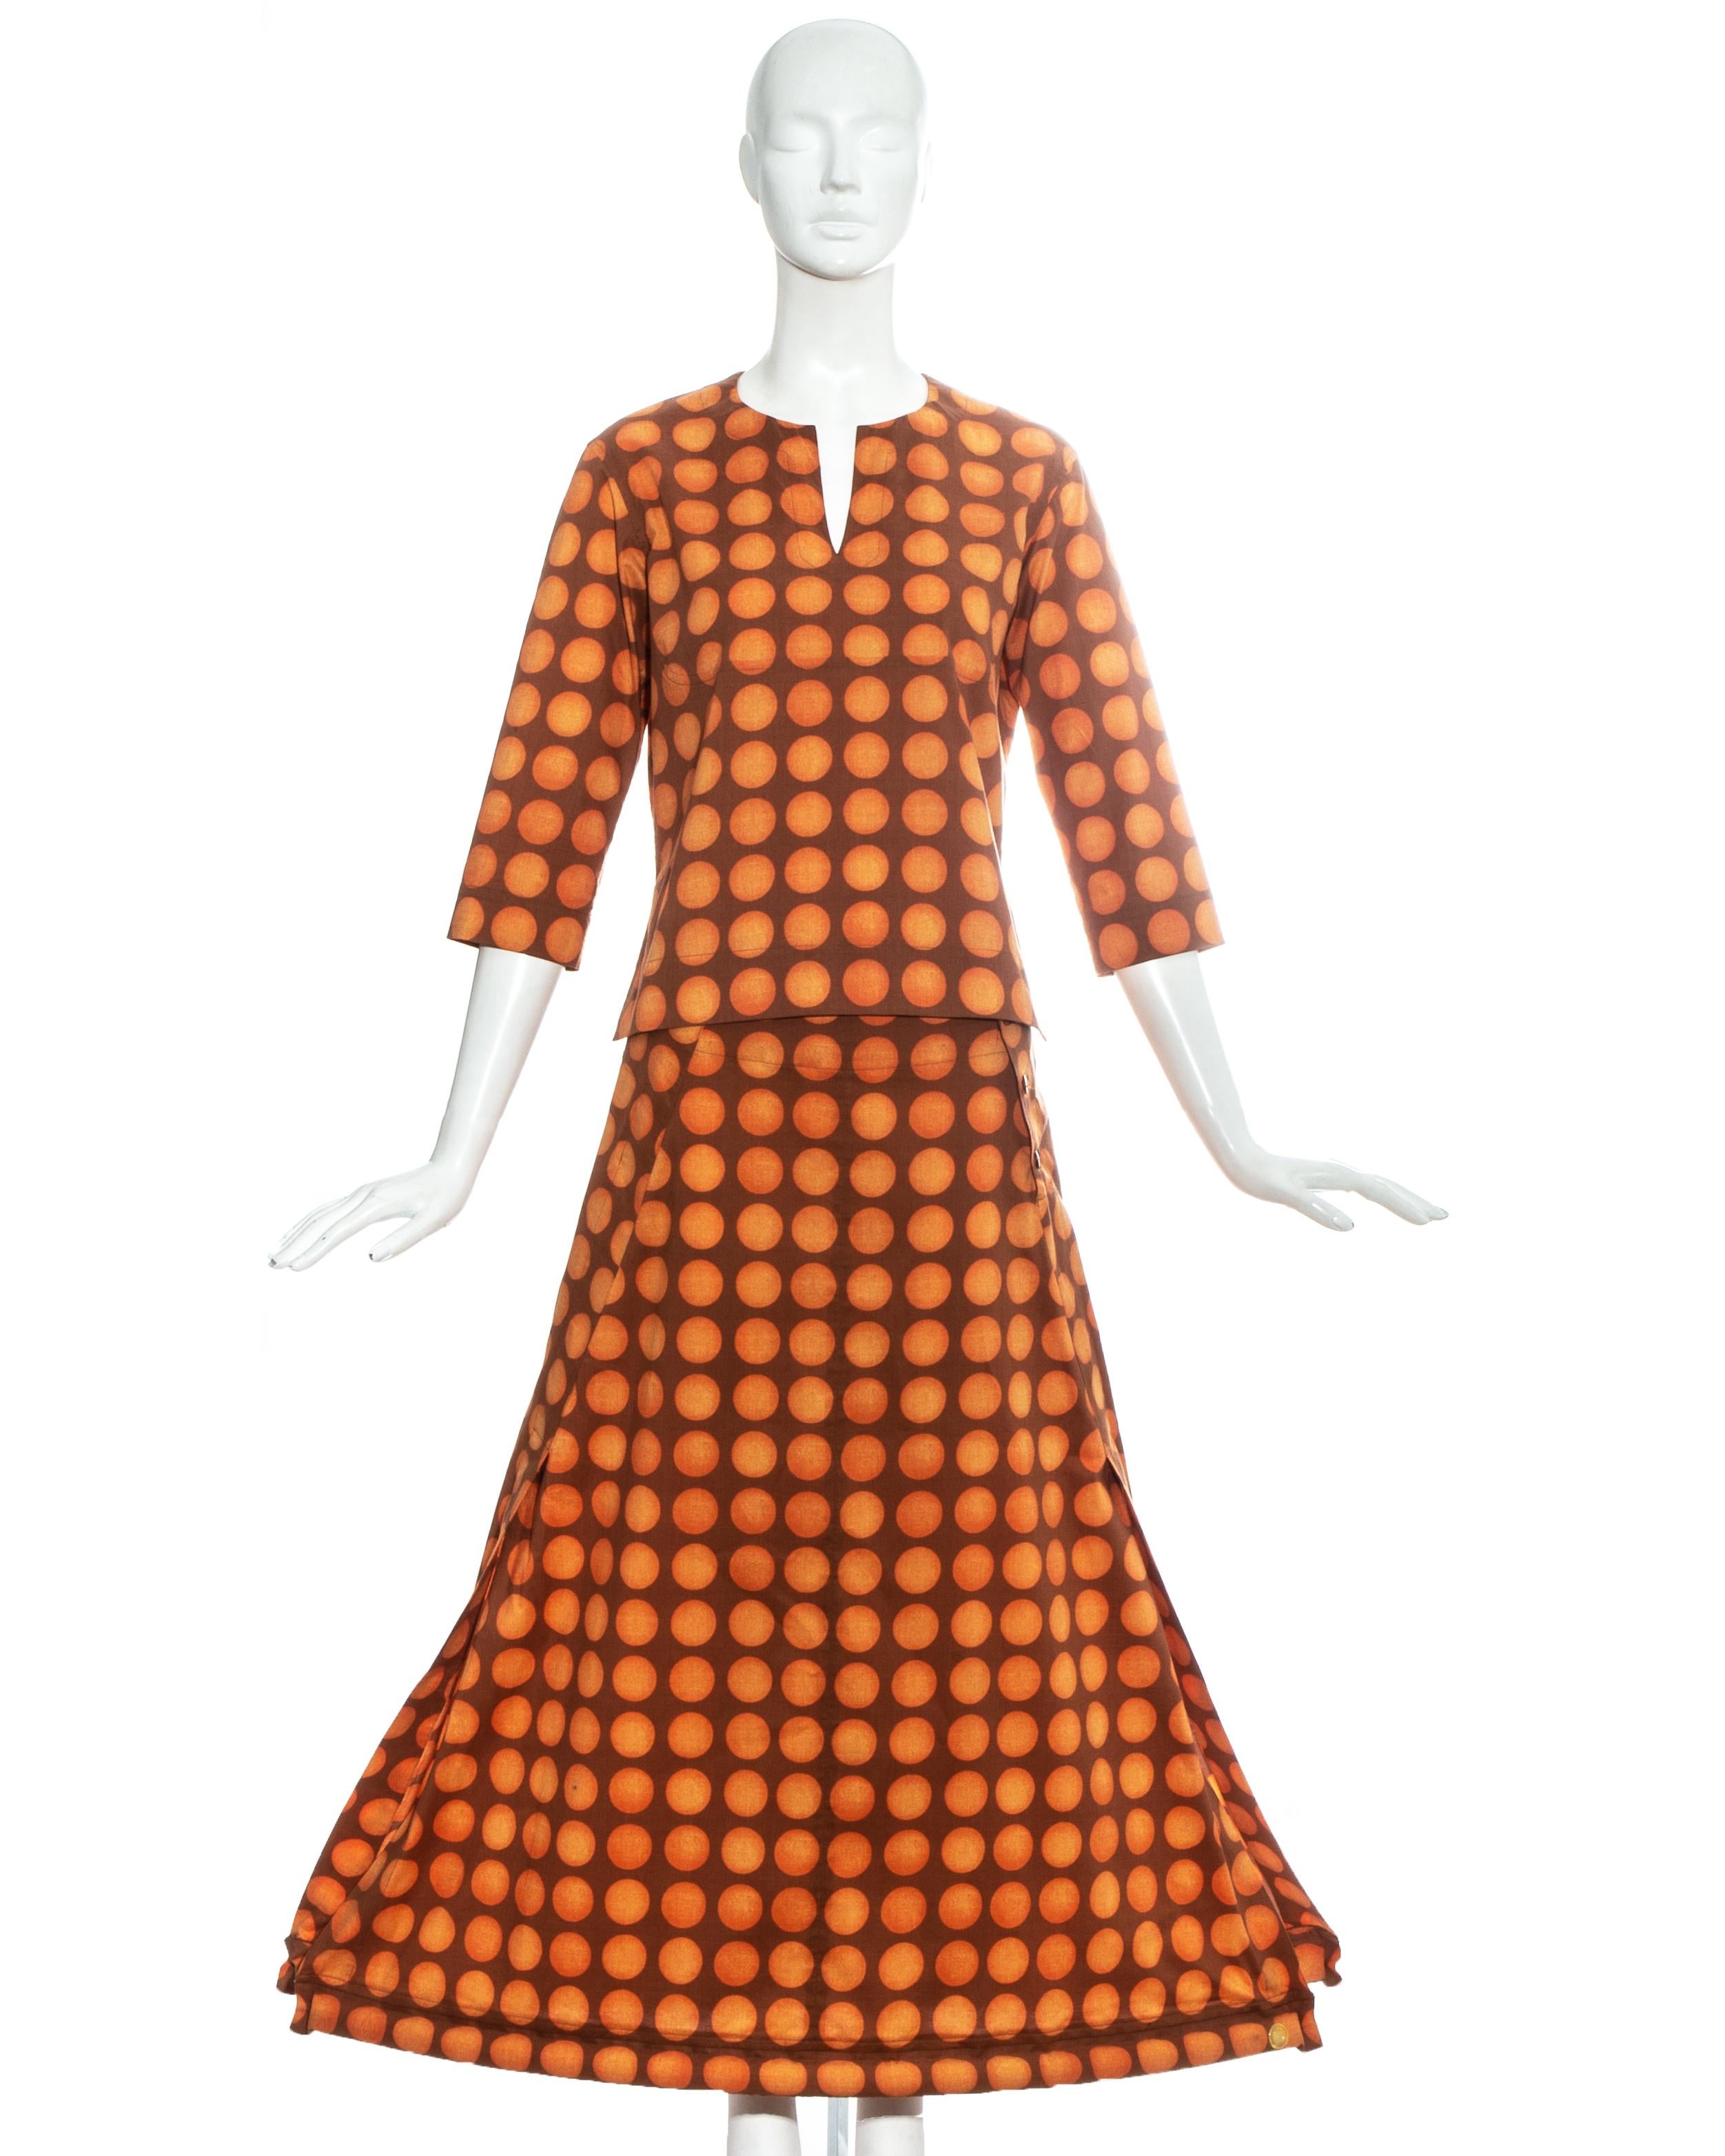 Issey Miyake orange polkadot printed cotton skirt suit comprising: tunic with three-quarter length sleeves and maxi skirt with inflatable tubular hem.

Spring-Summer 2001